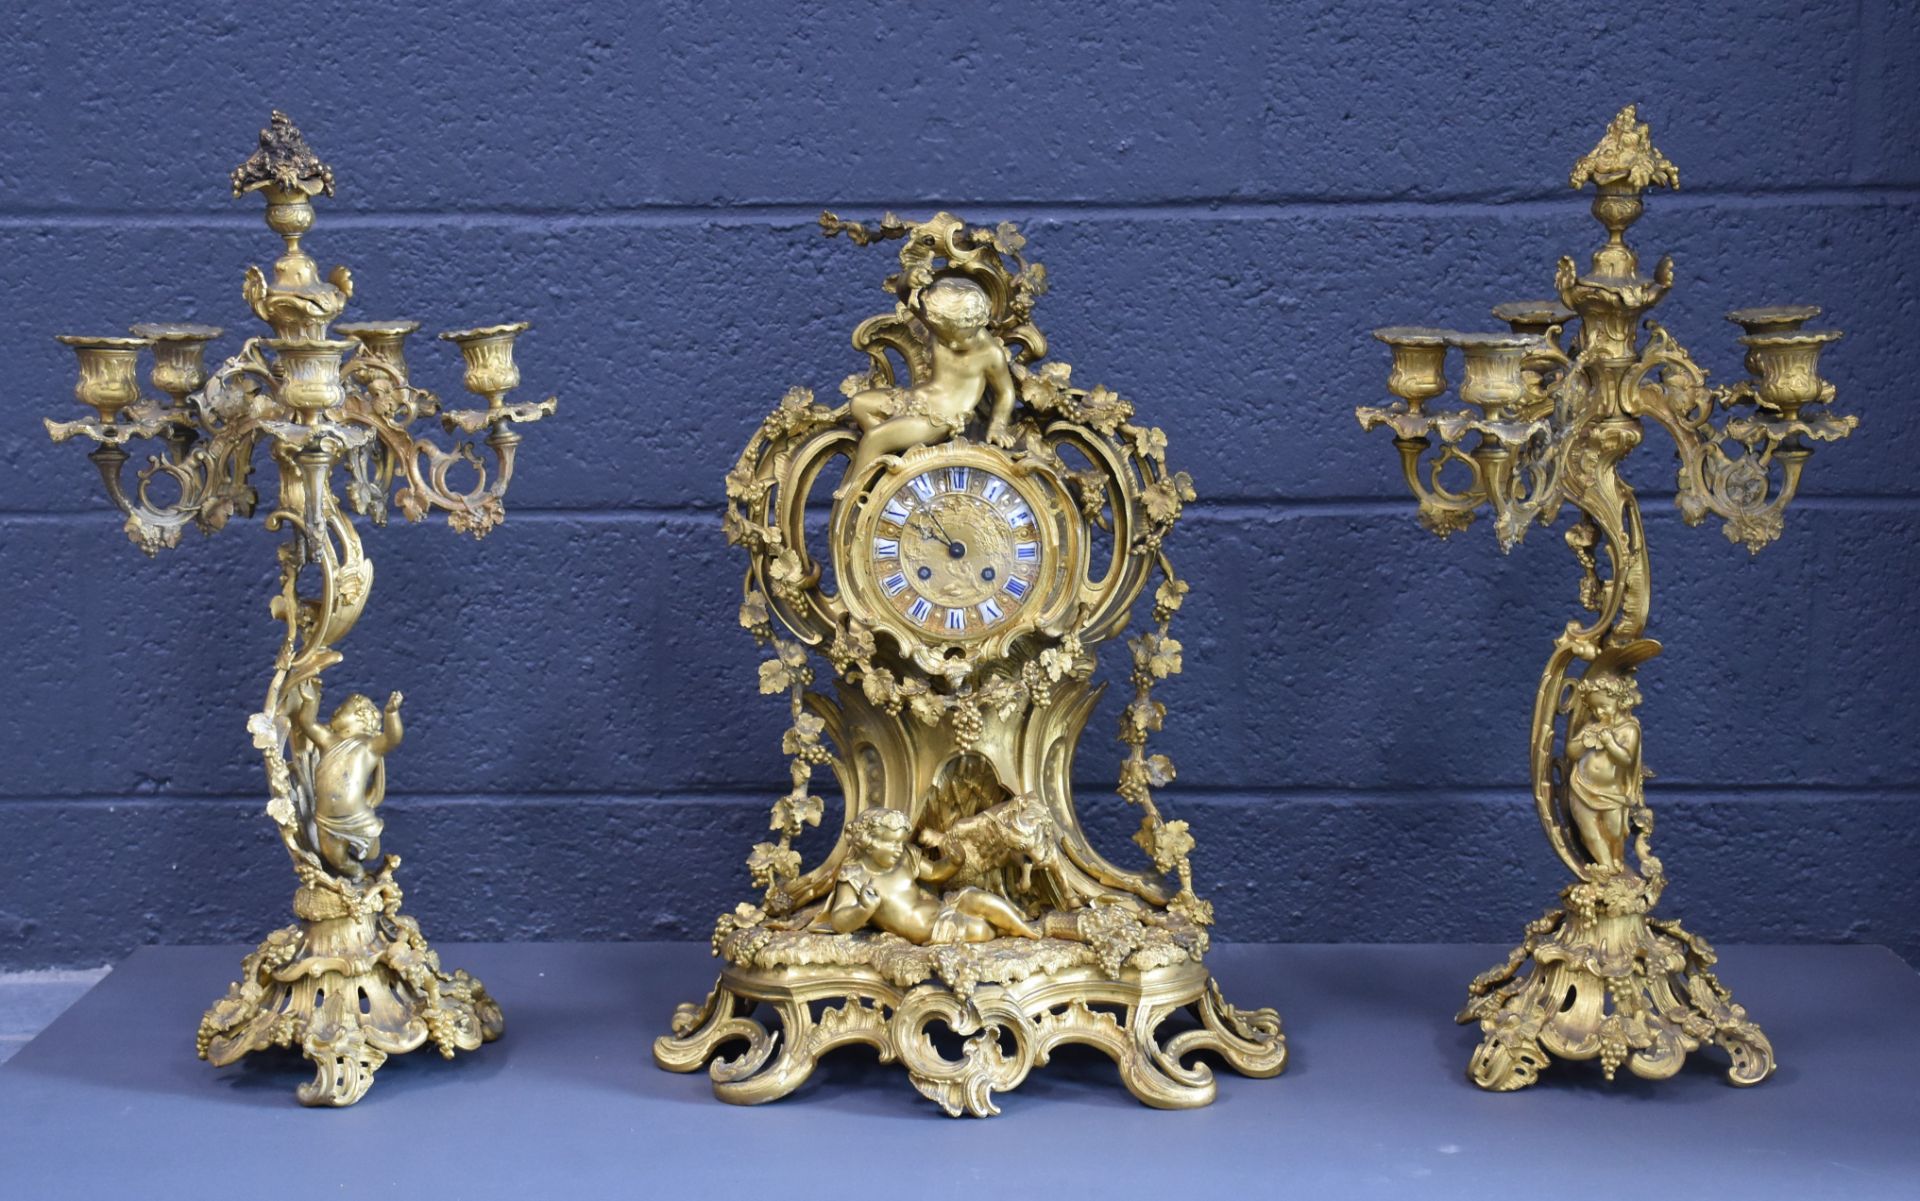 Rocaille style gilt bronze trim with putti decoration. Napoleon III period. Beautiful dial with reli